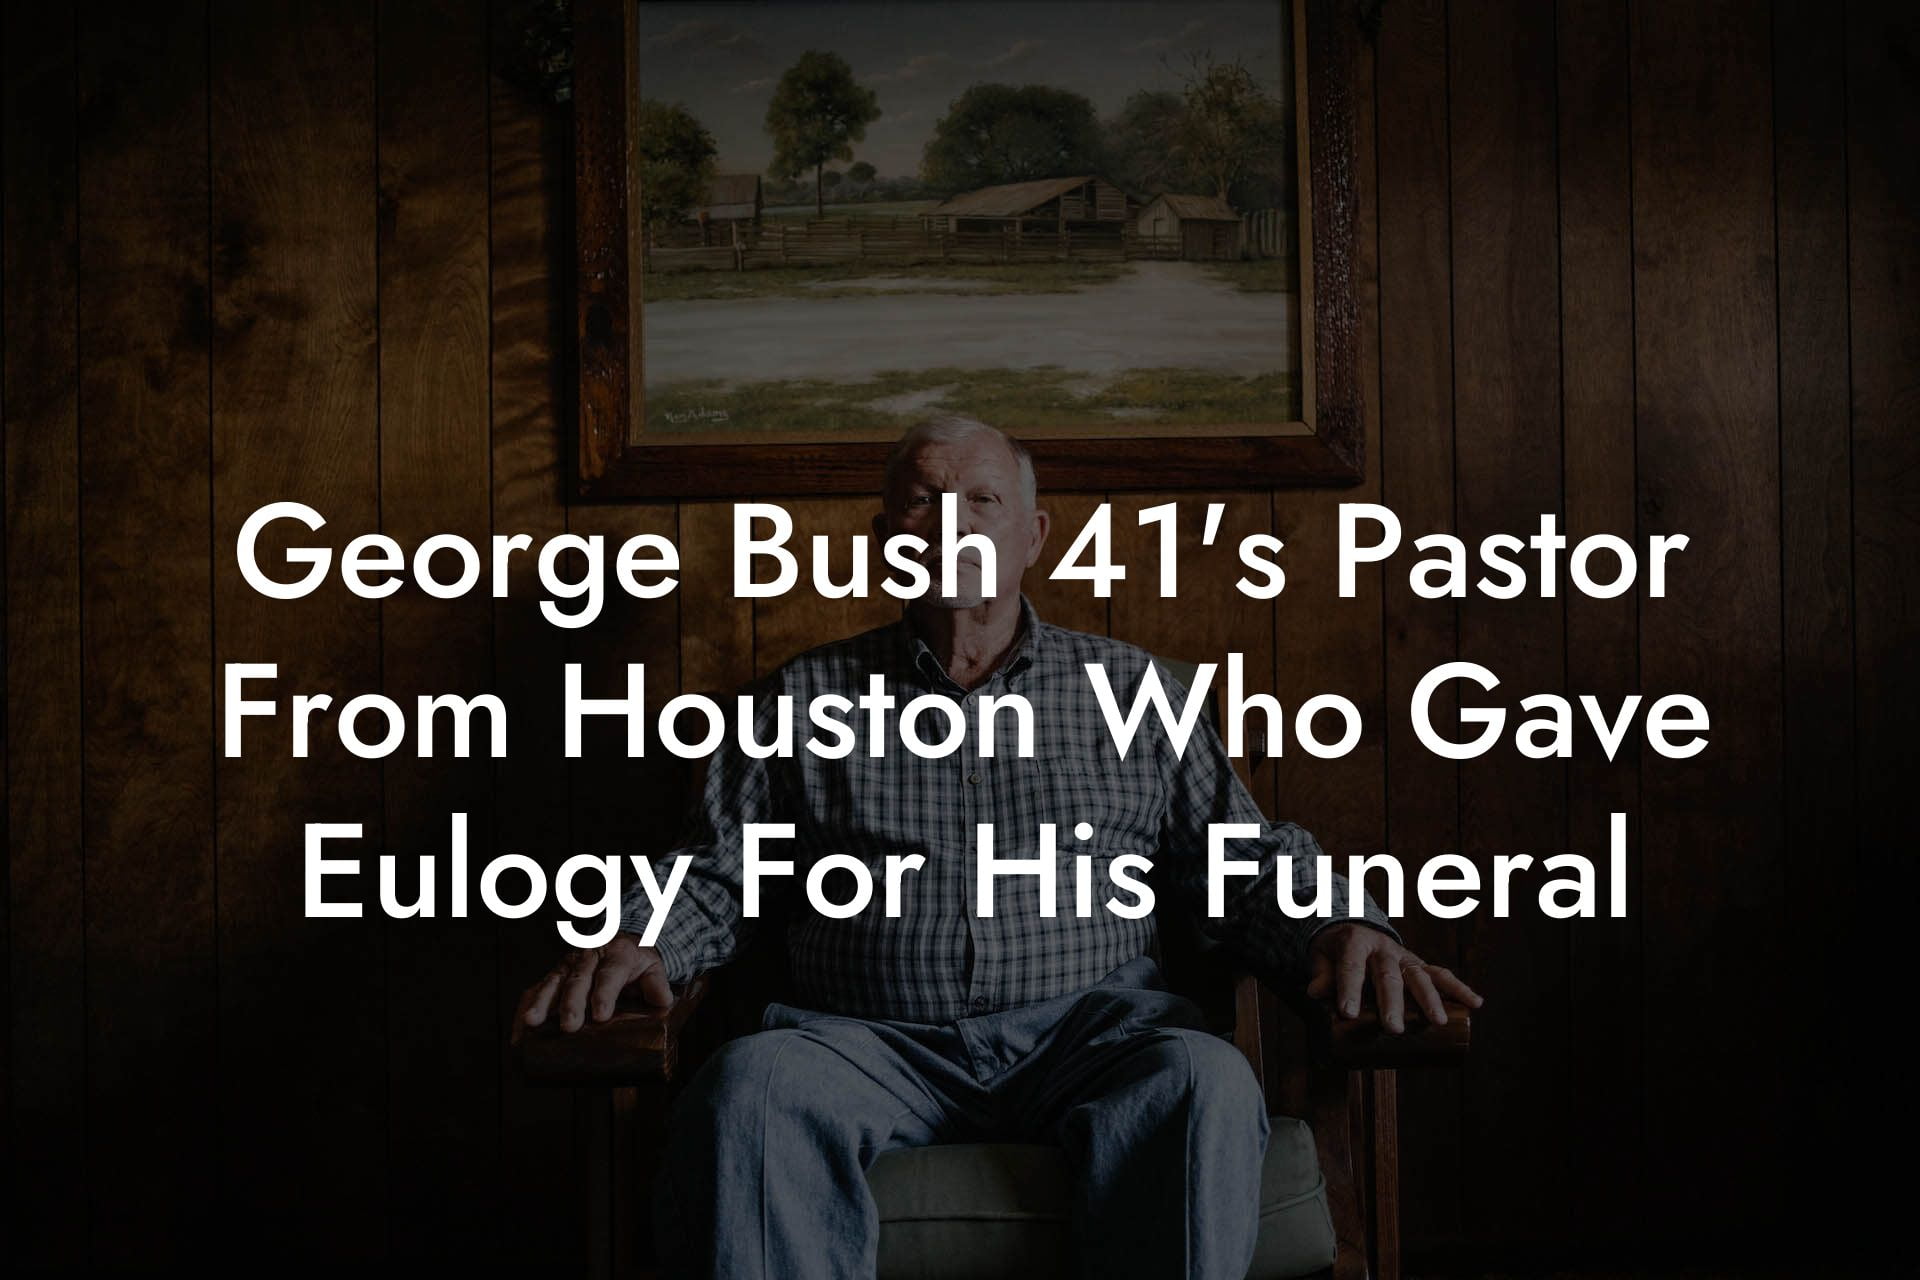 George Bush 41's Pastor From Houston Who Gave Eulogy For His Funeral